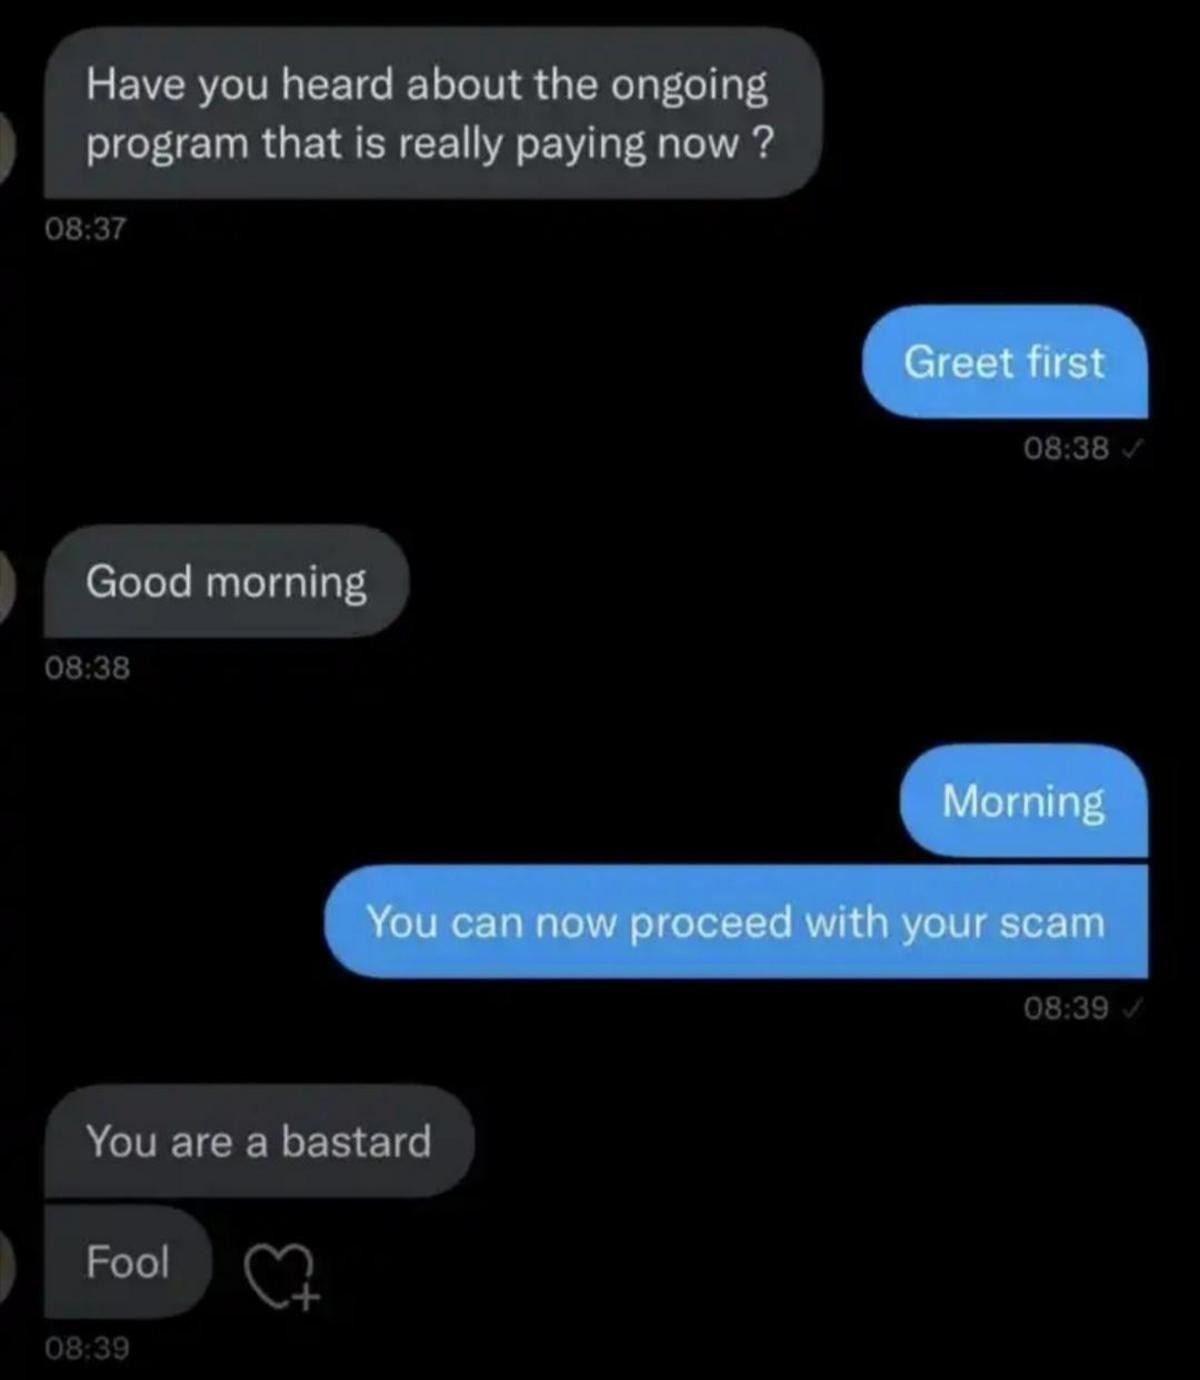 &quot;Have you heard about the ongoing program that is really paying now?&quot; Response is &quot;Greet first,&quot; and after they say &quot;Good morning,&quot; they&#x27;re told &quot;Morning, you can now proceed with your scam,&quot; and the response is &quot;You are a bastard, fool&quot;